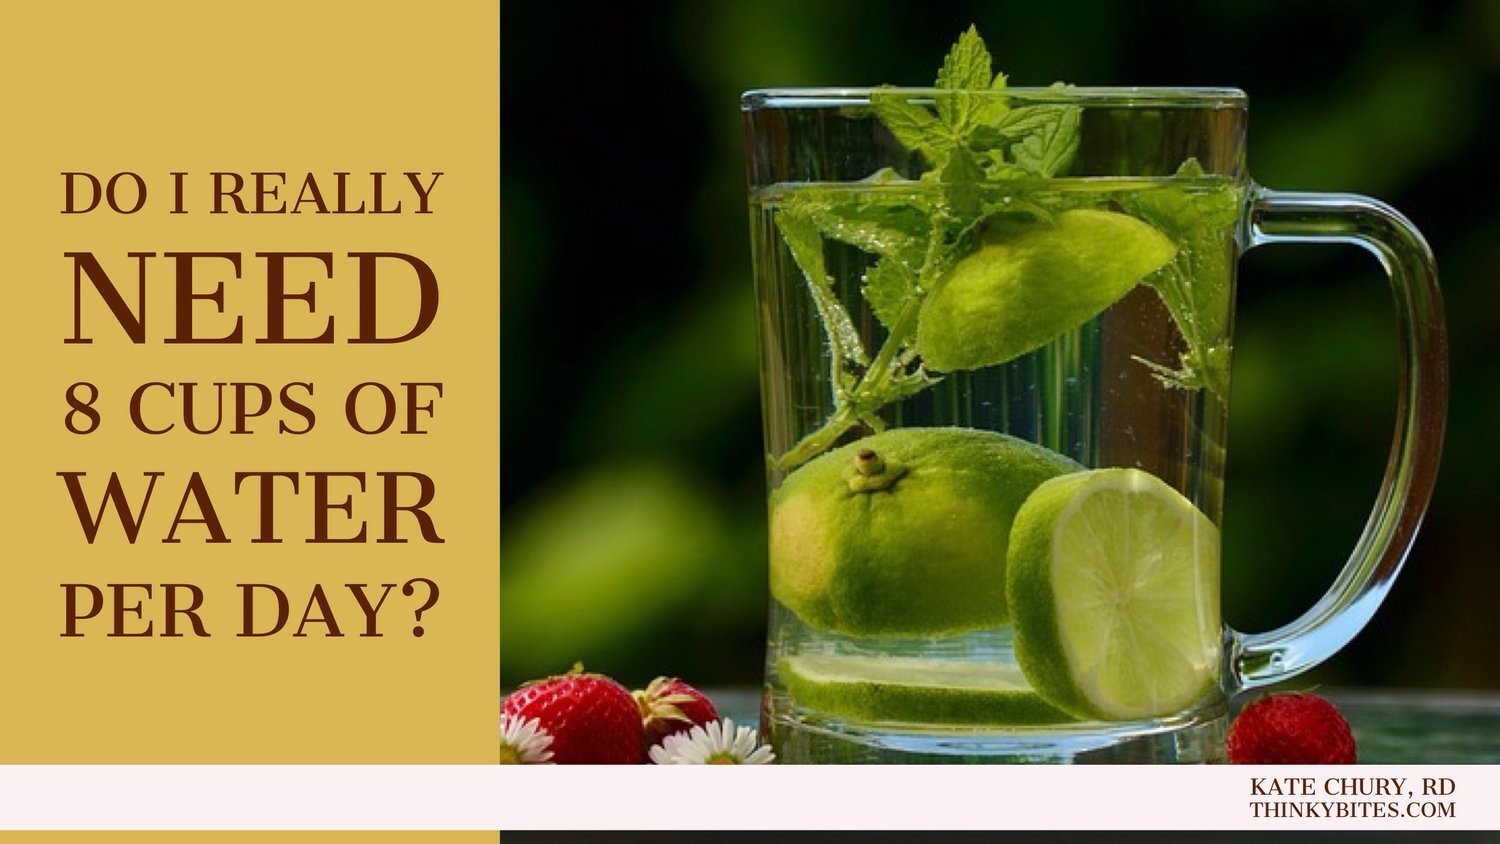 Do I Really Need 8 Cups of Water Per Day?